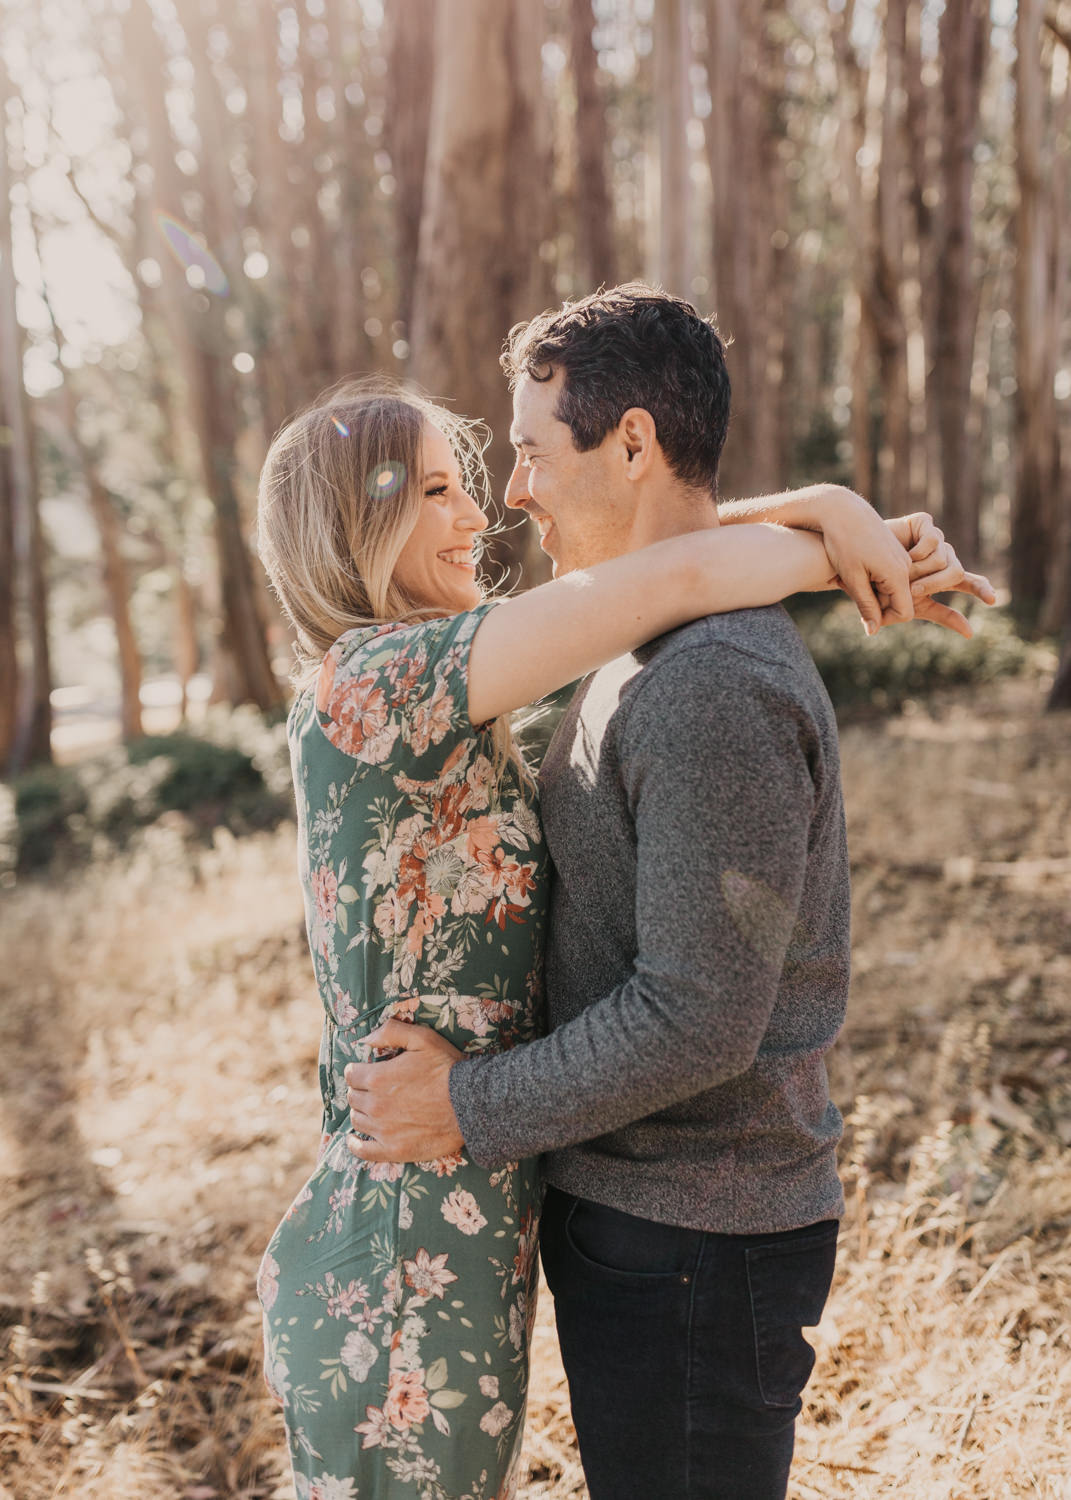 San Francisco Lovers Lane Presidio California Engagement Session couples posing inspo engagement session outfit Inspo free spirit engagement photos wild and free engagement session bay area bride Rachel christopherson Photography